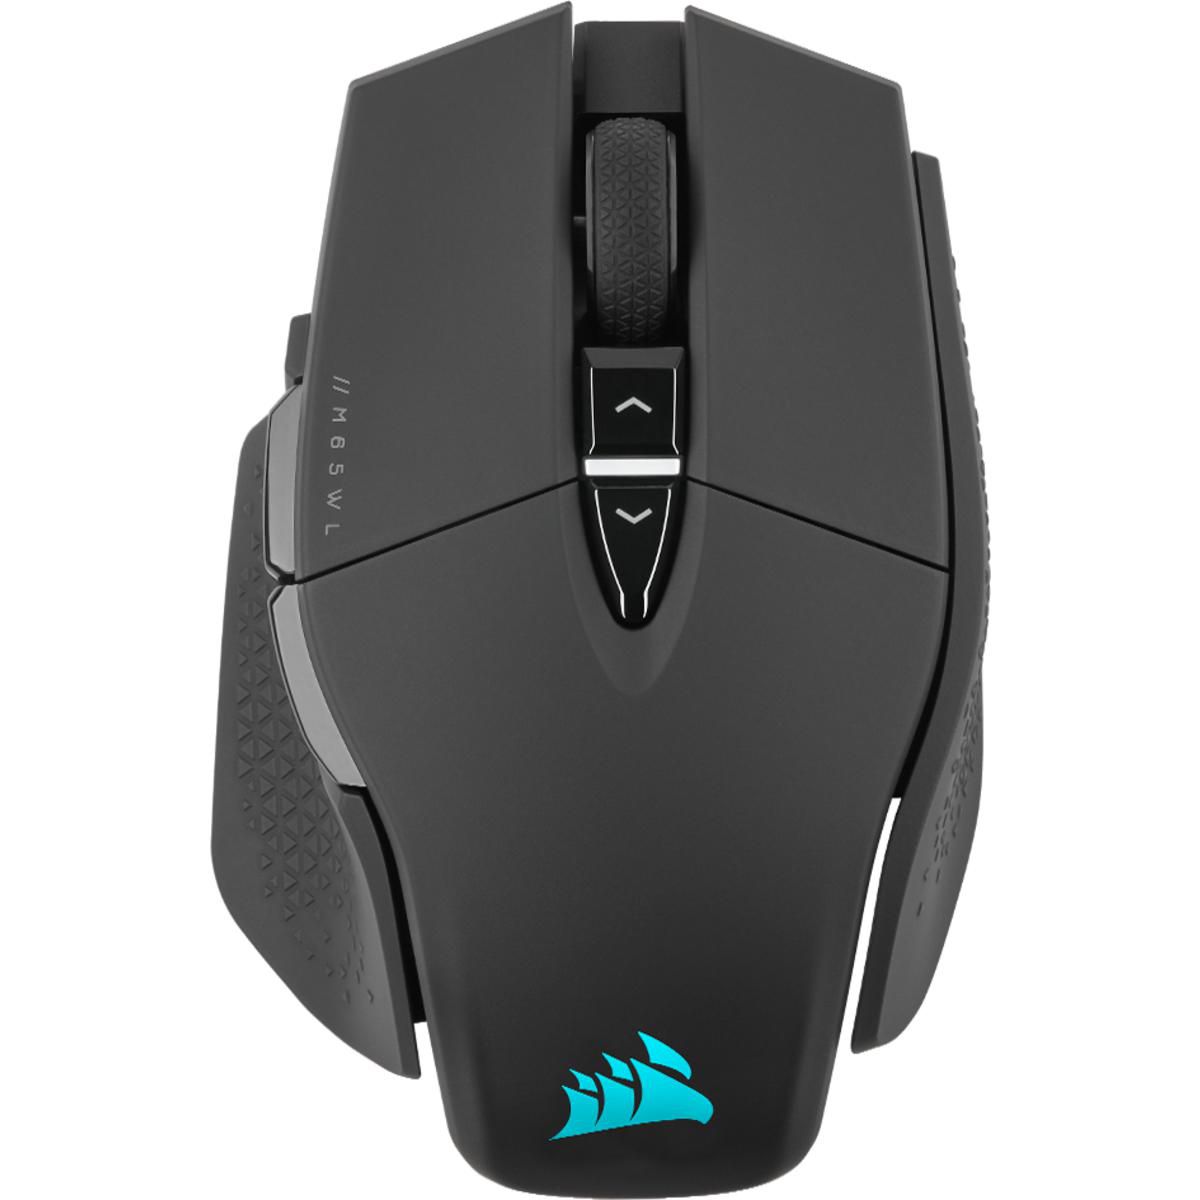 CORSAIR M65 RGB ULTRA Gaming Mouse Wireless